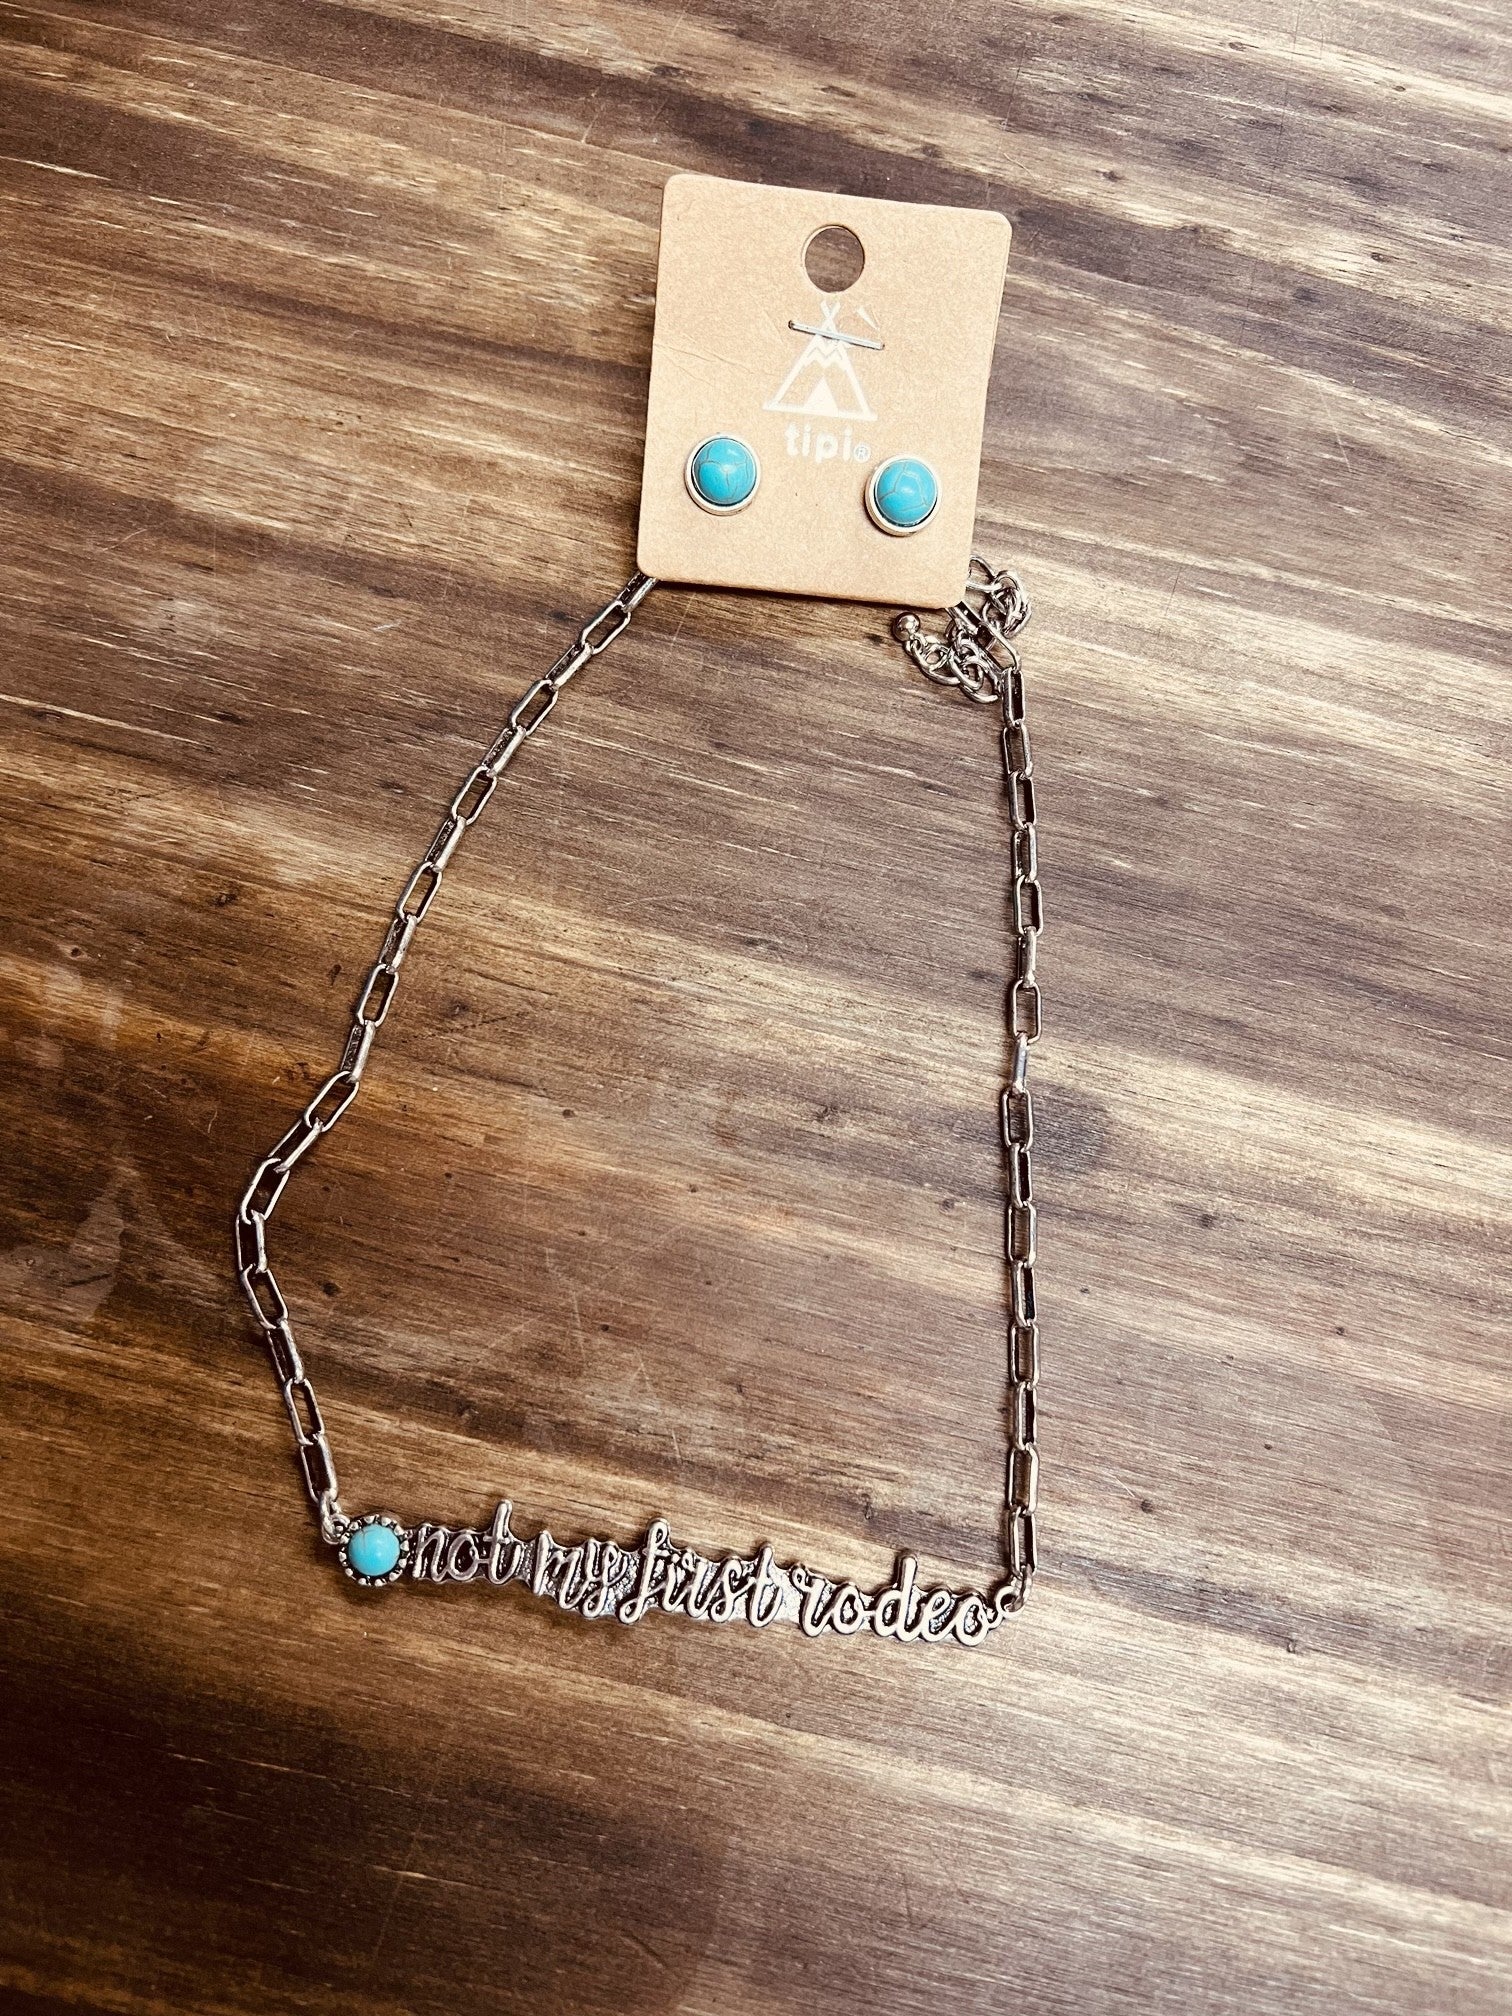 Not My First Rodeo Necklace